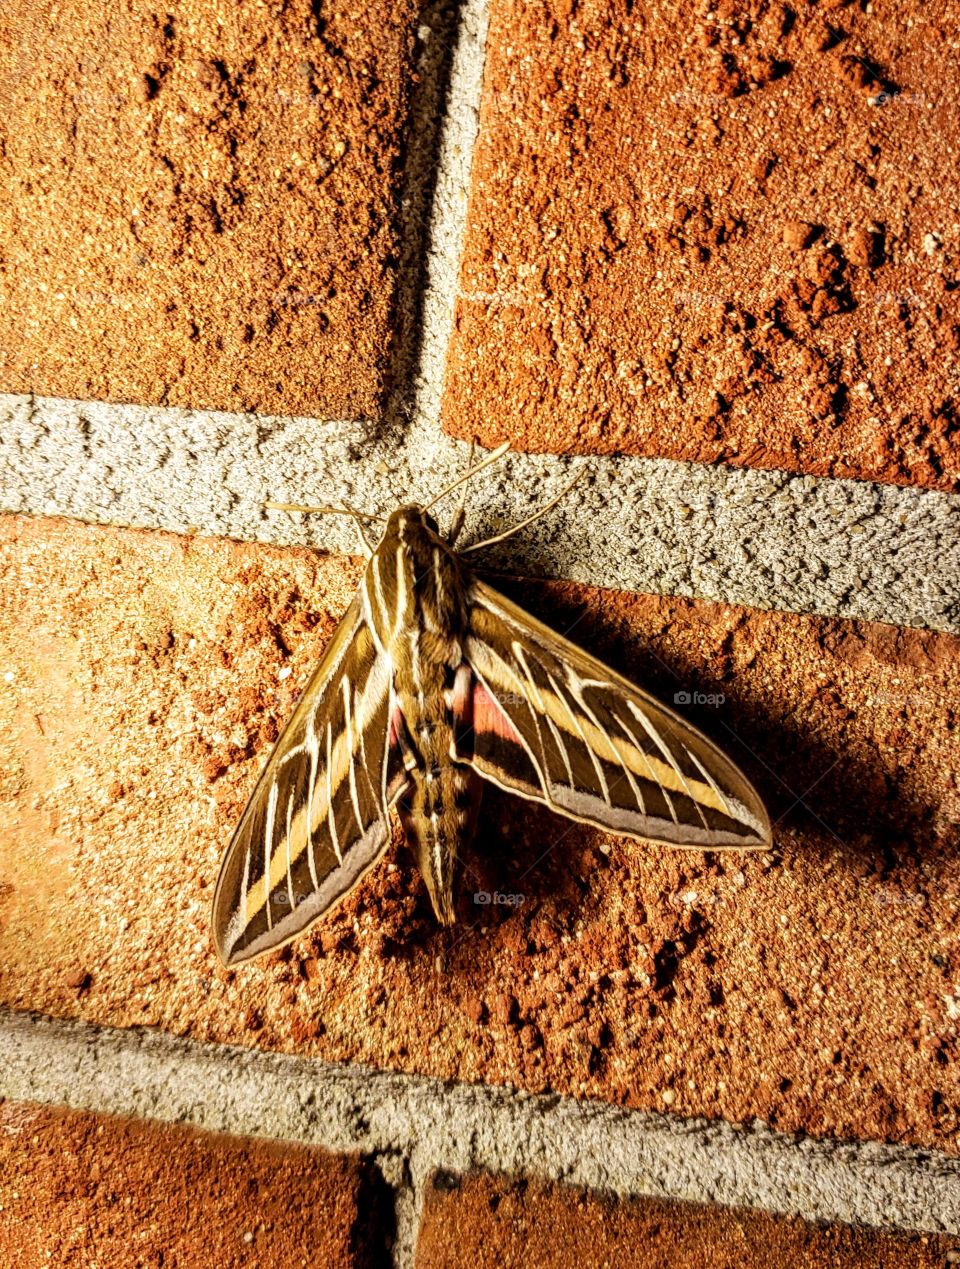 We keep seeing this giant moth on our porch but can't identify the species. It's as large as a lunar moth but the colours are warmer, especially the hidden pink spots on the wings. It was almost camouflaged but wouldn't move from the grout.